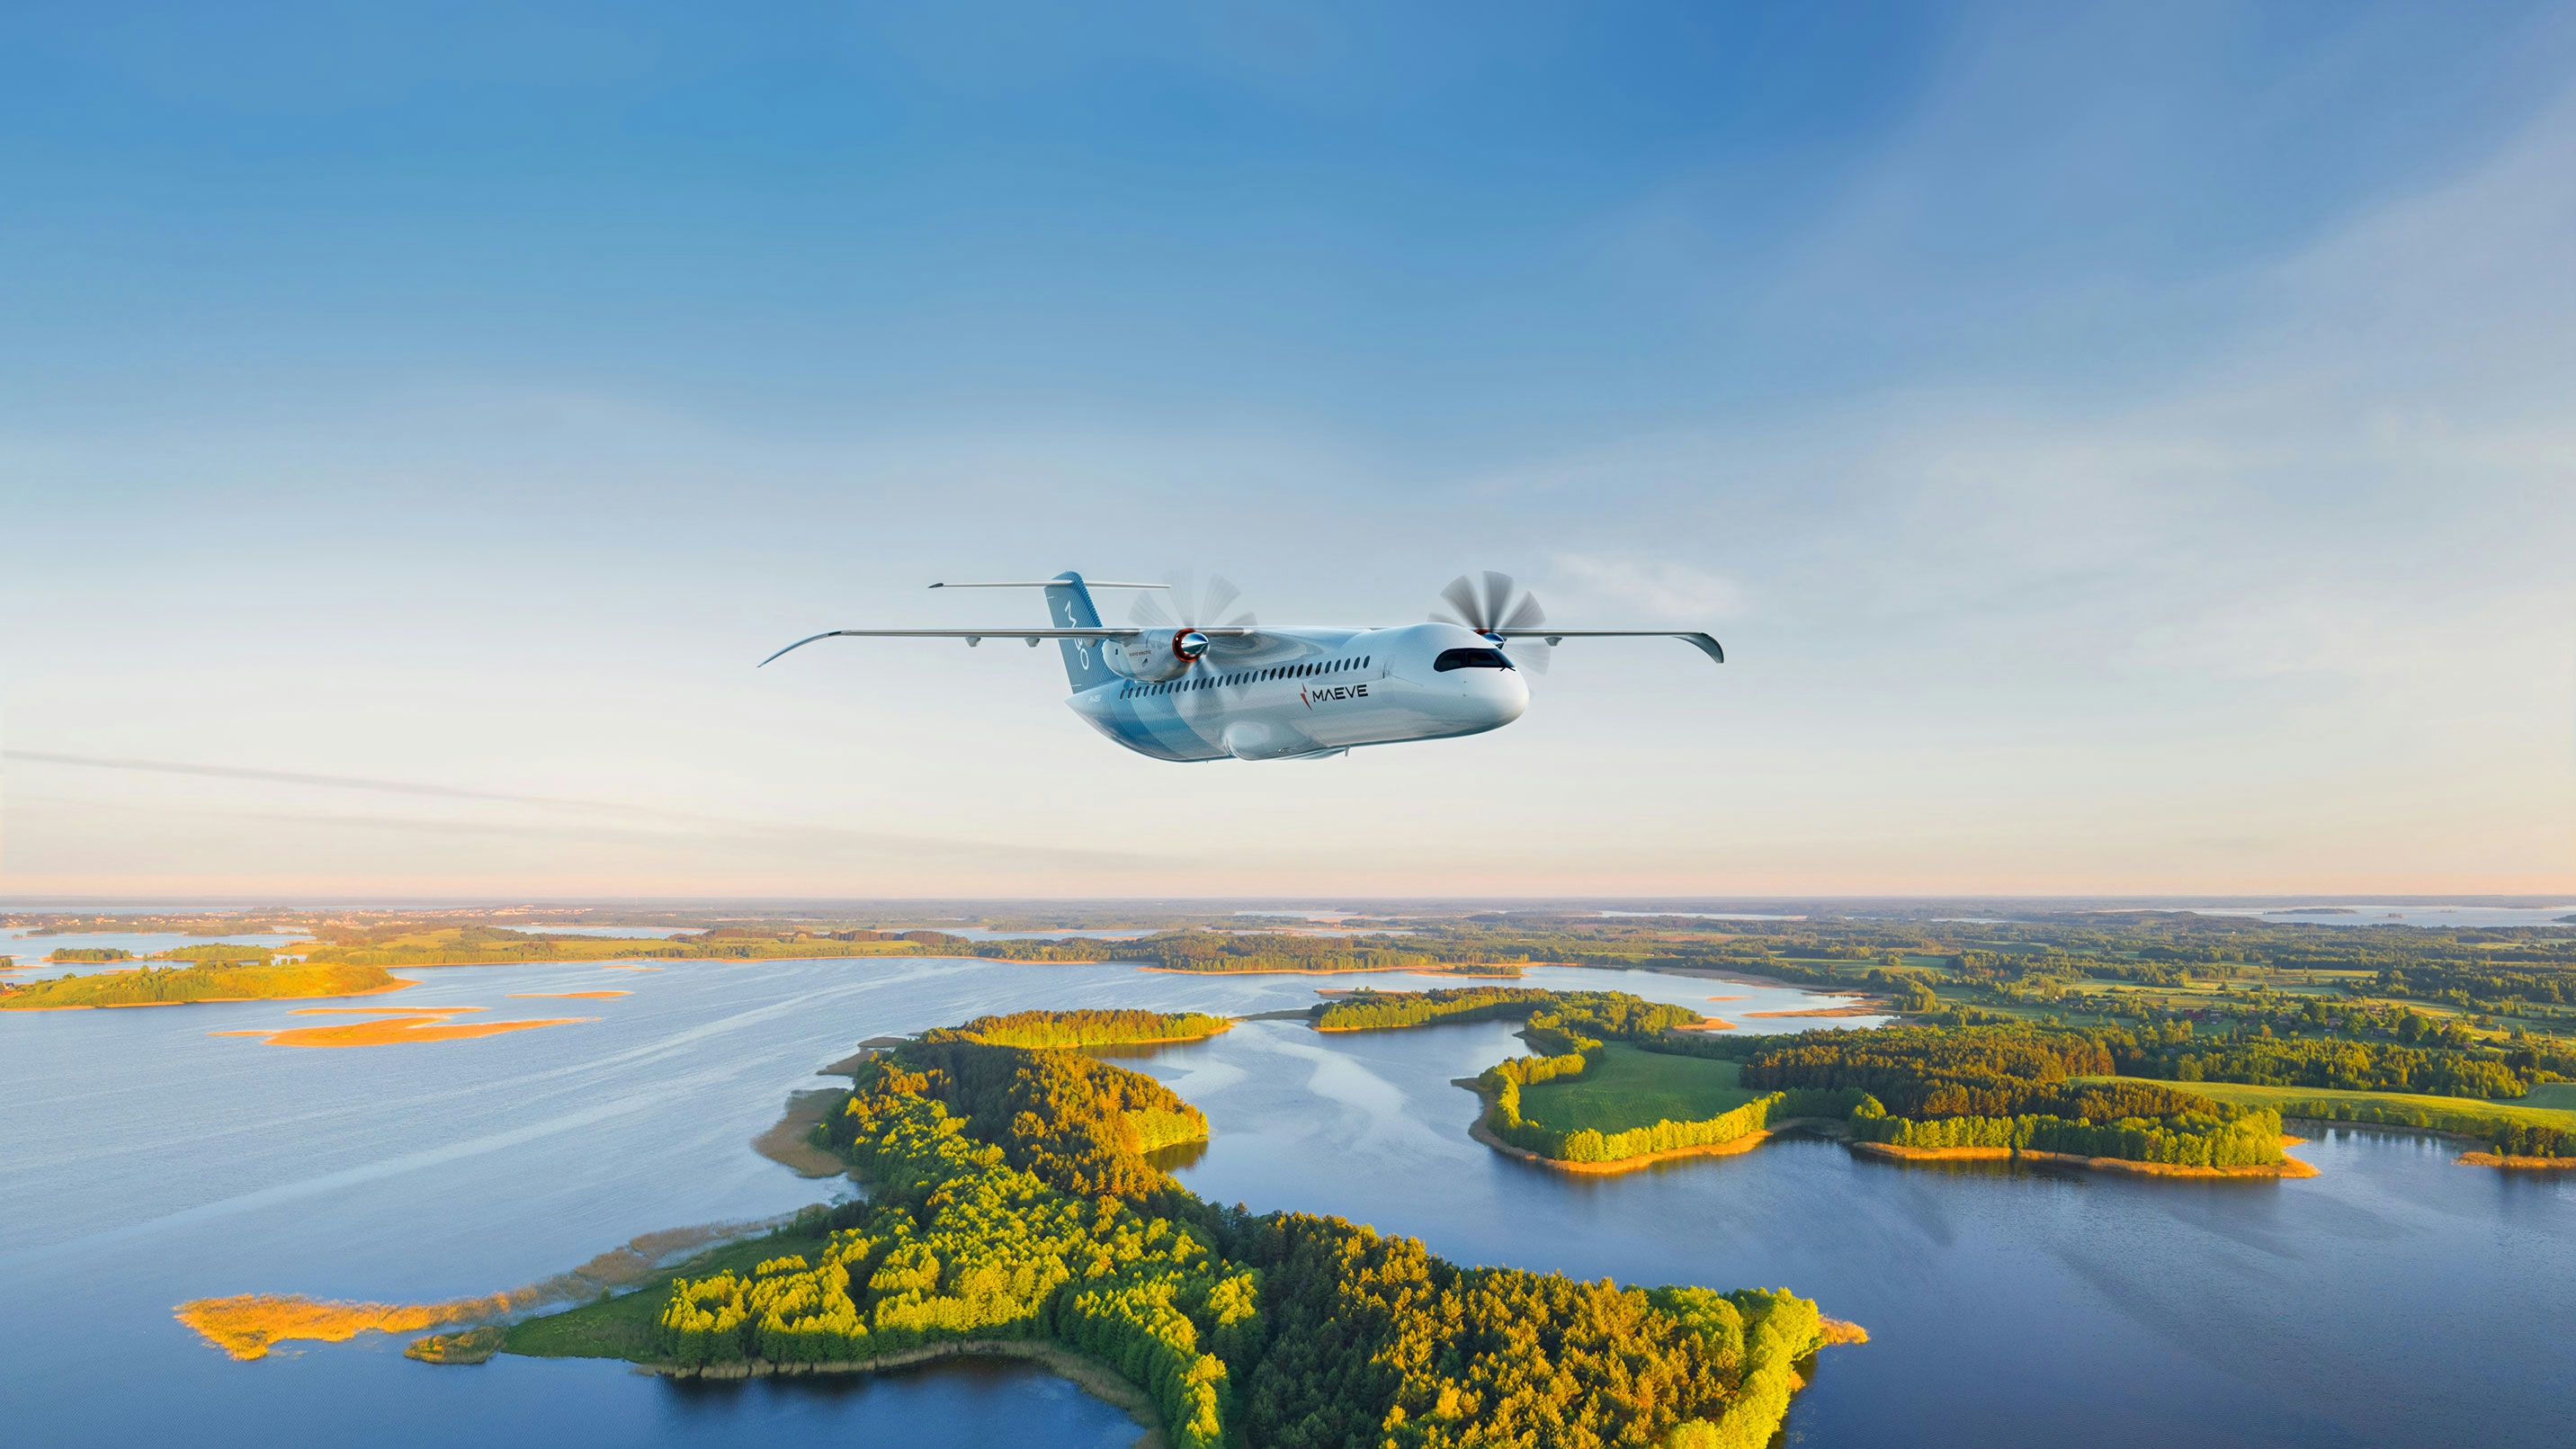 Introducing the next generation of regional aircraft